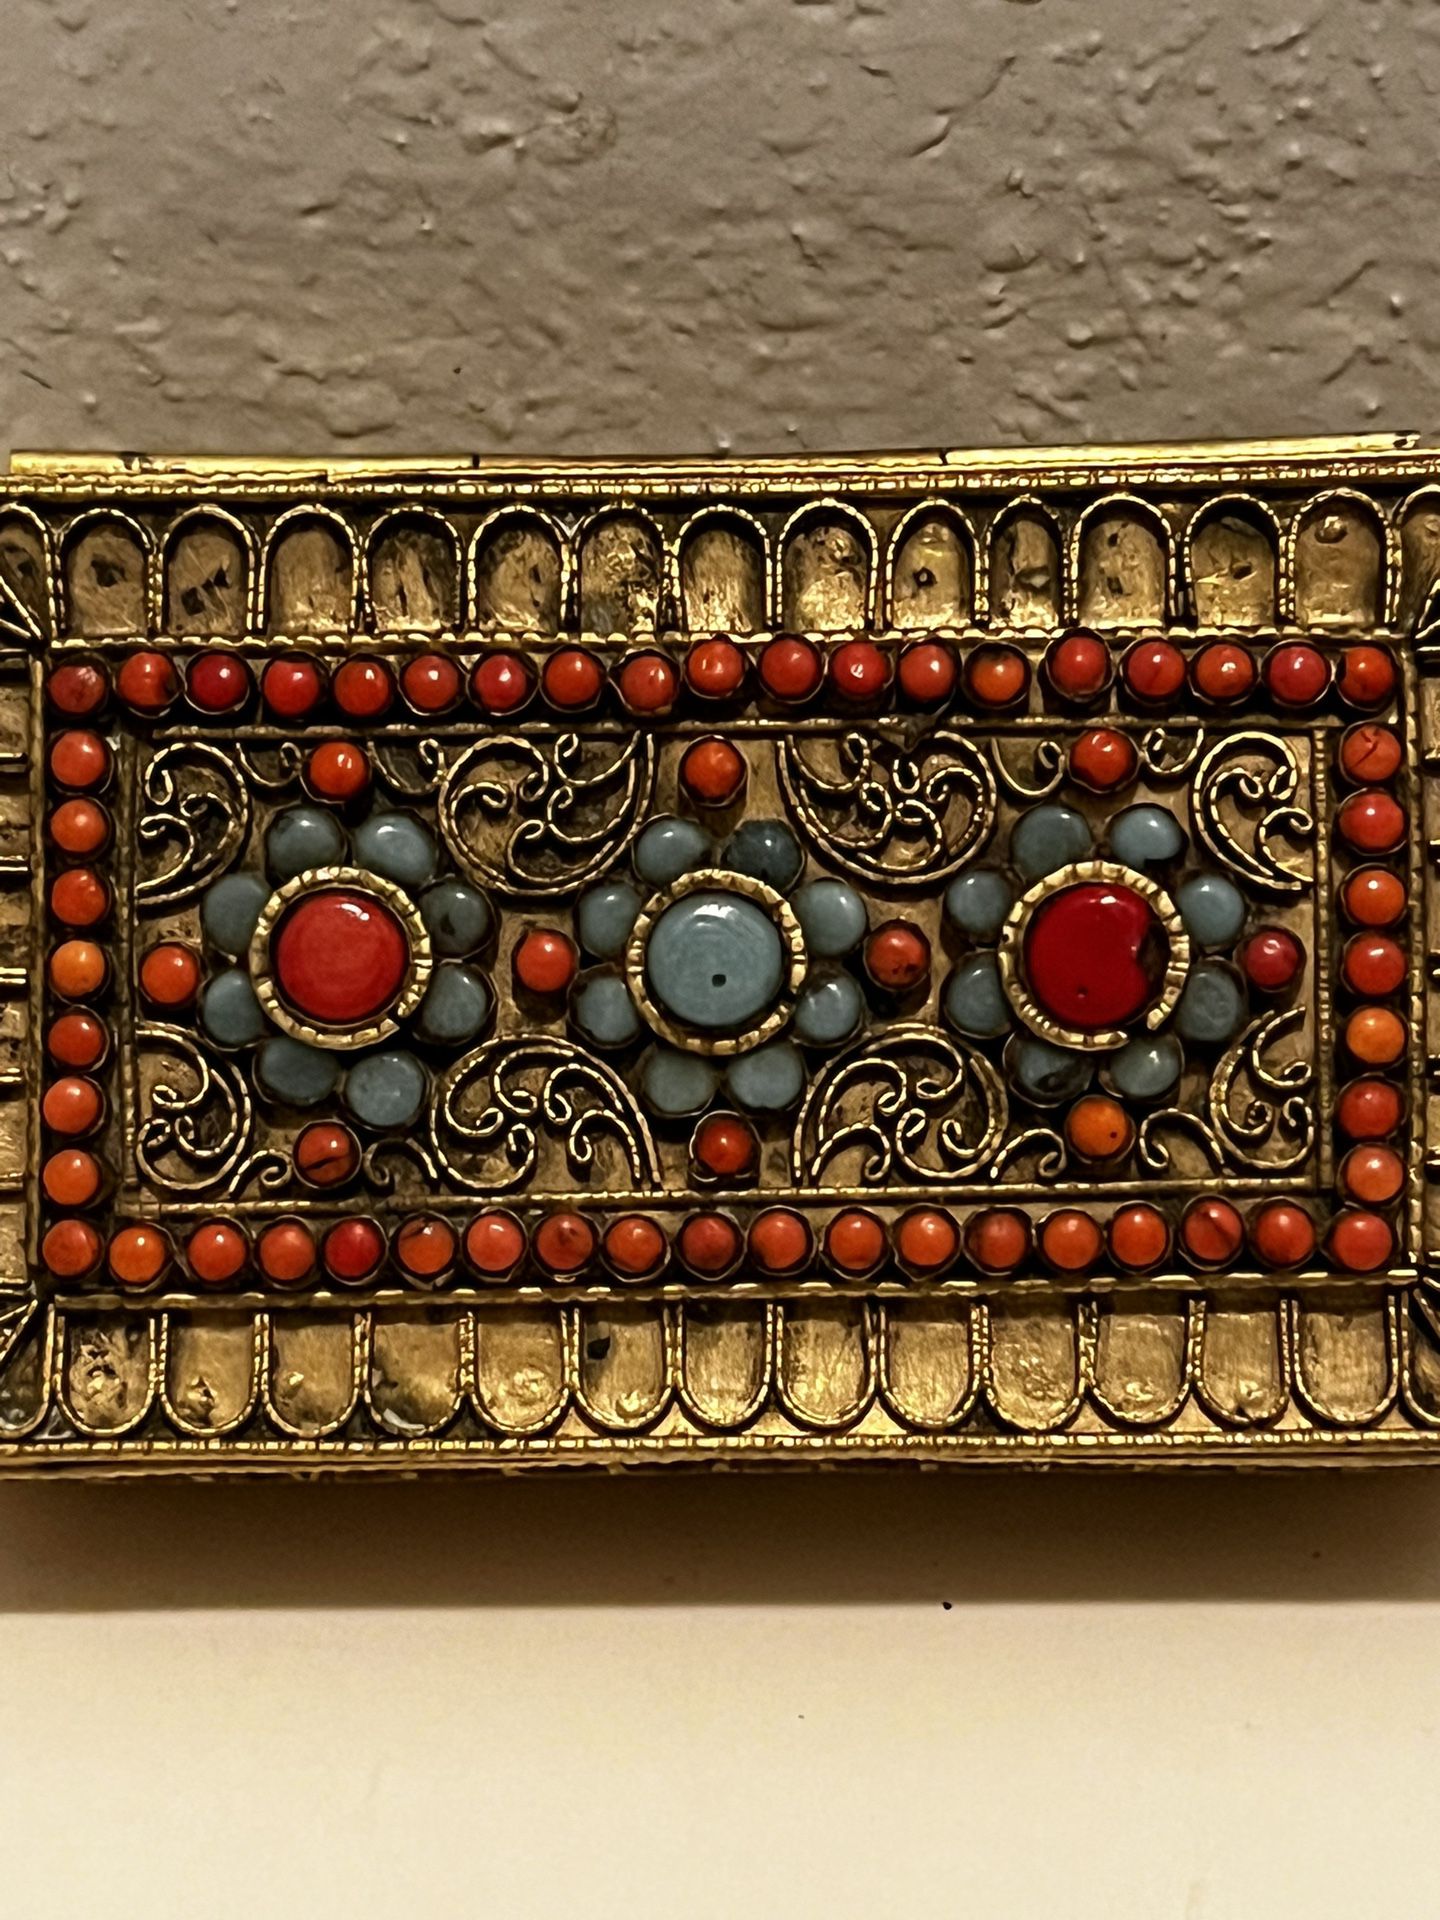 Antique Tibetan Gilded Box with Inlaid Ornate Turquoise & Coral Flower on Lid 